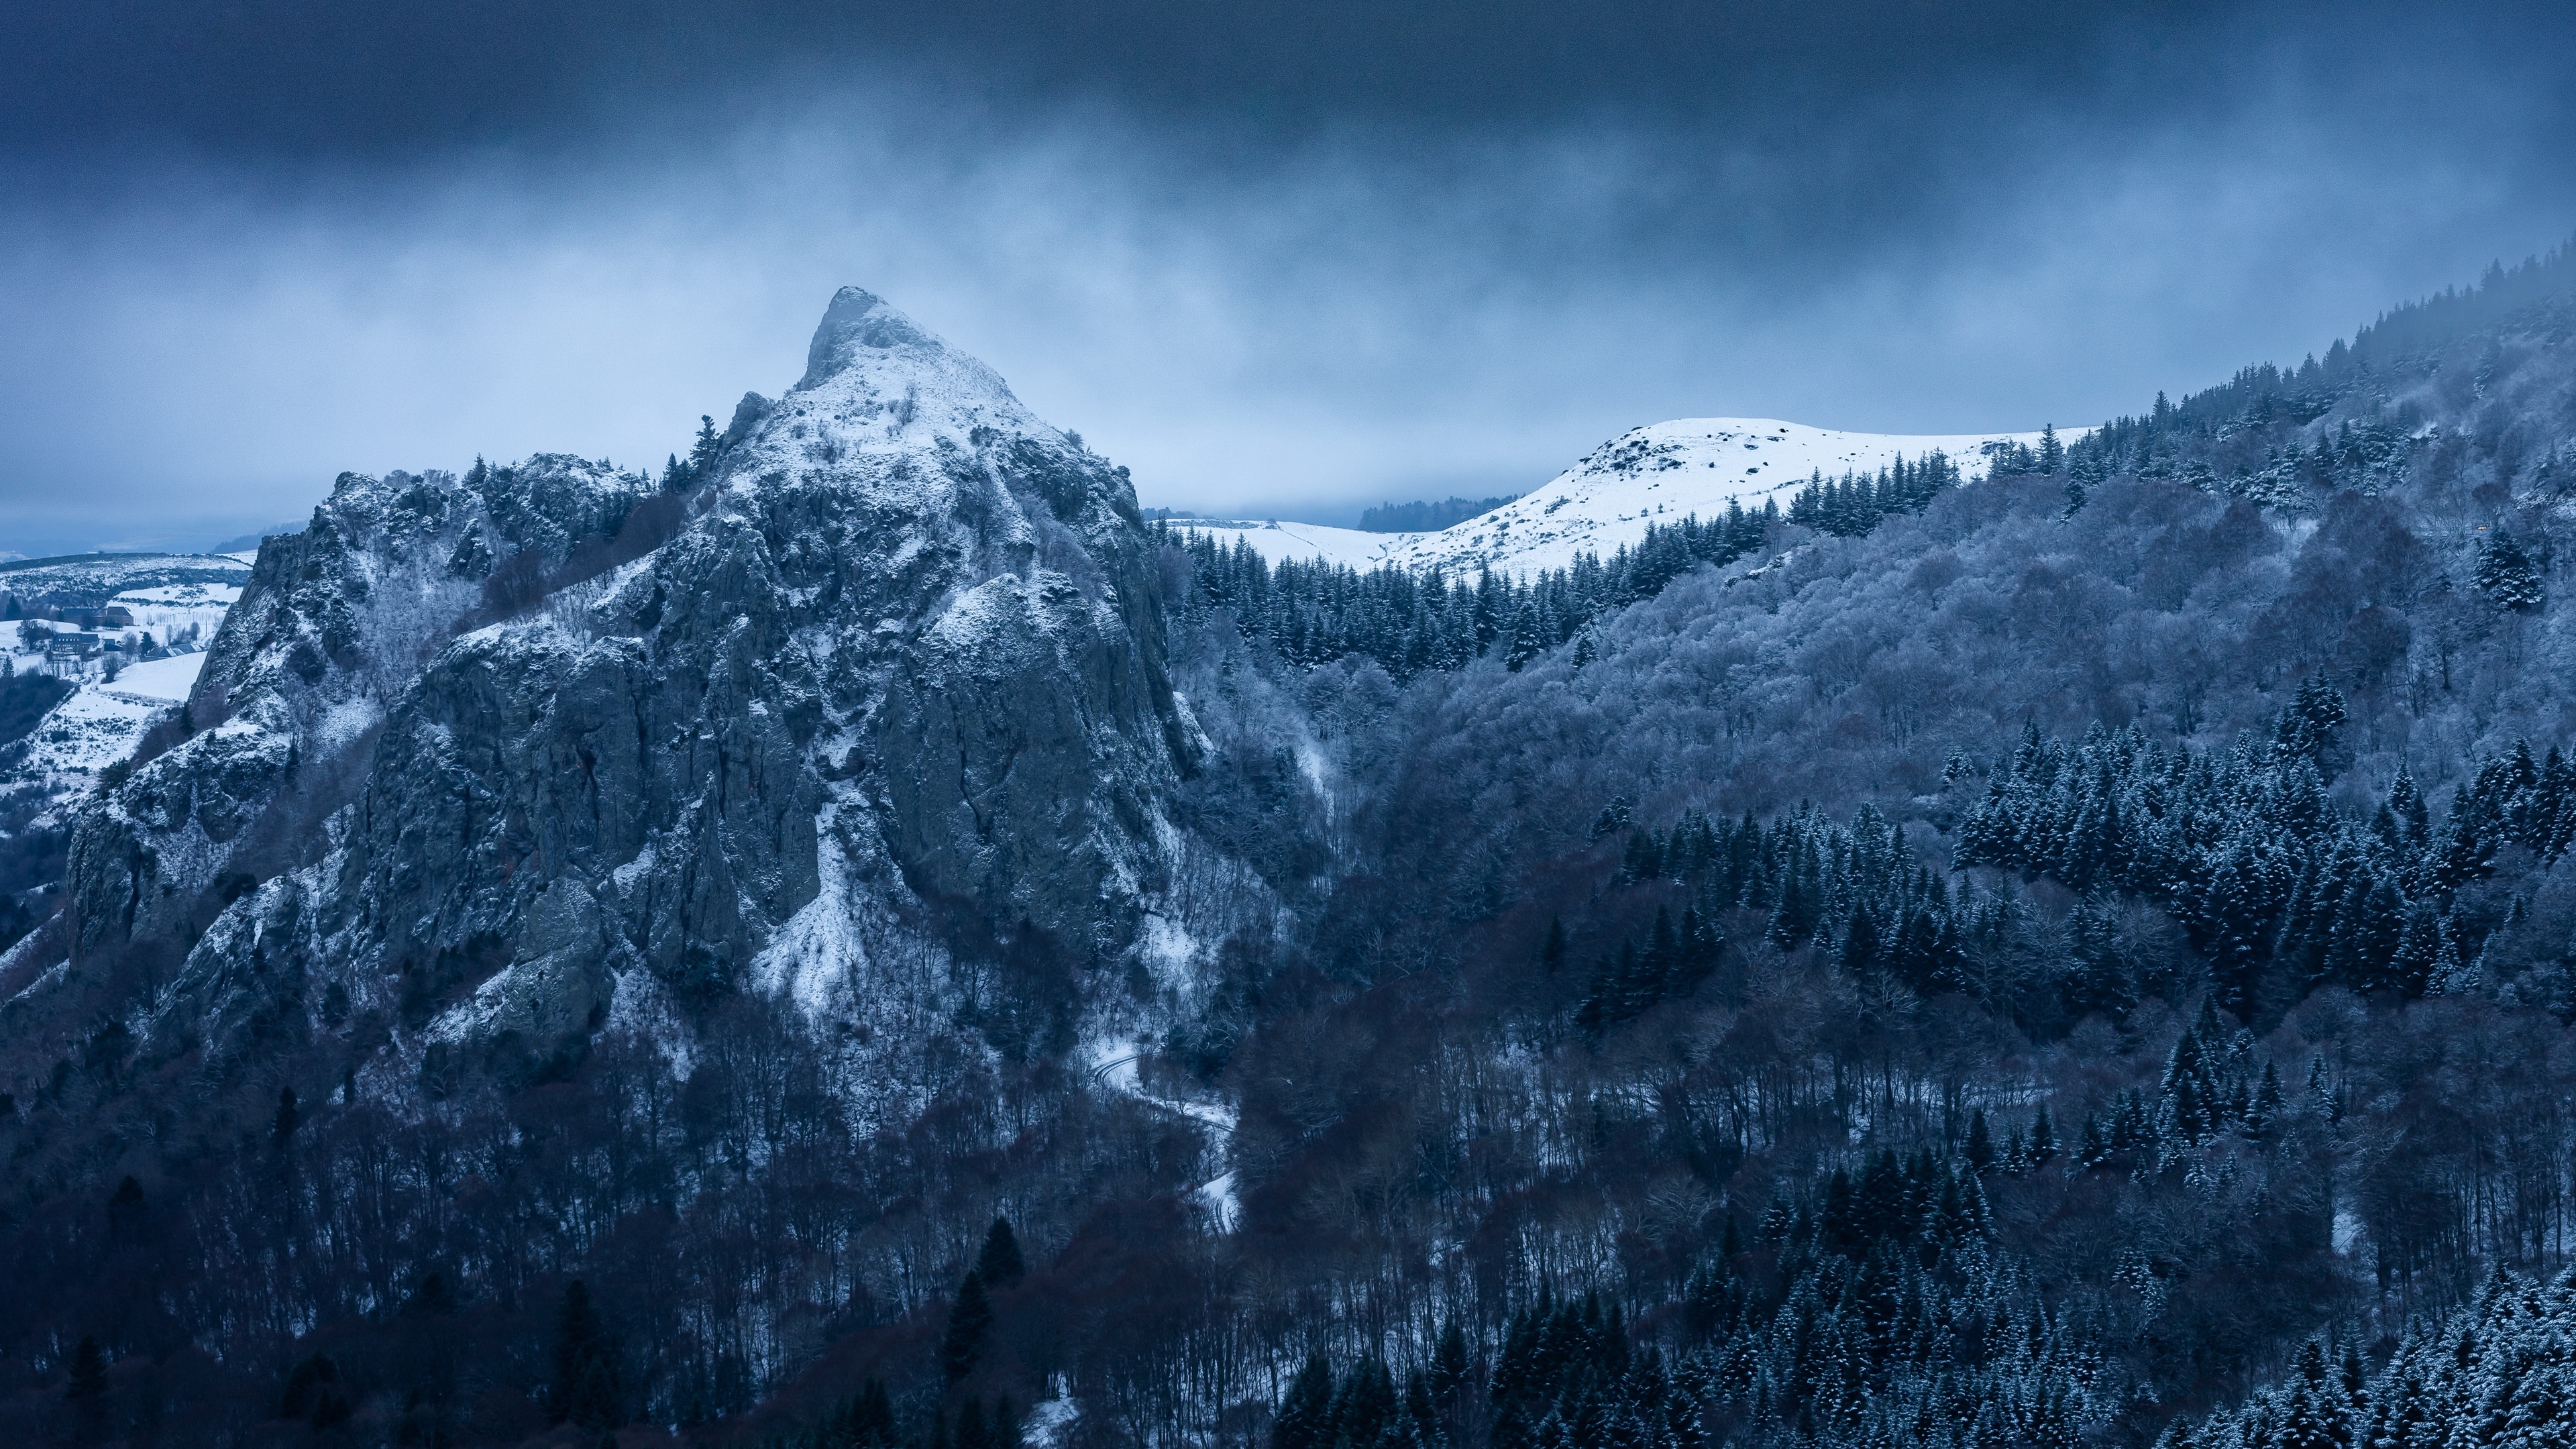 General 3840x2160 nature mountains cold outdoors winter snowy peak snowy mountain landscape